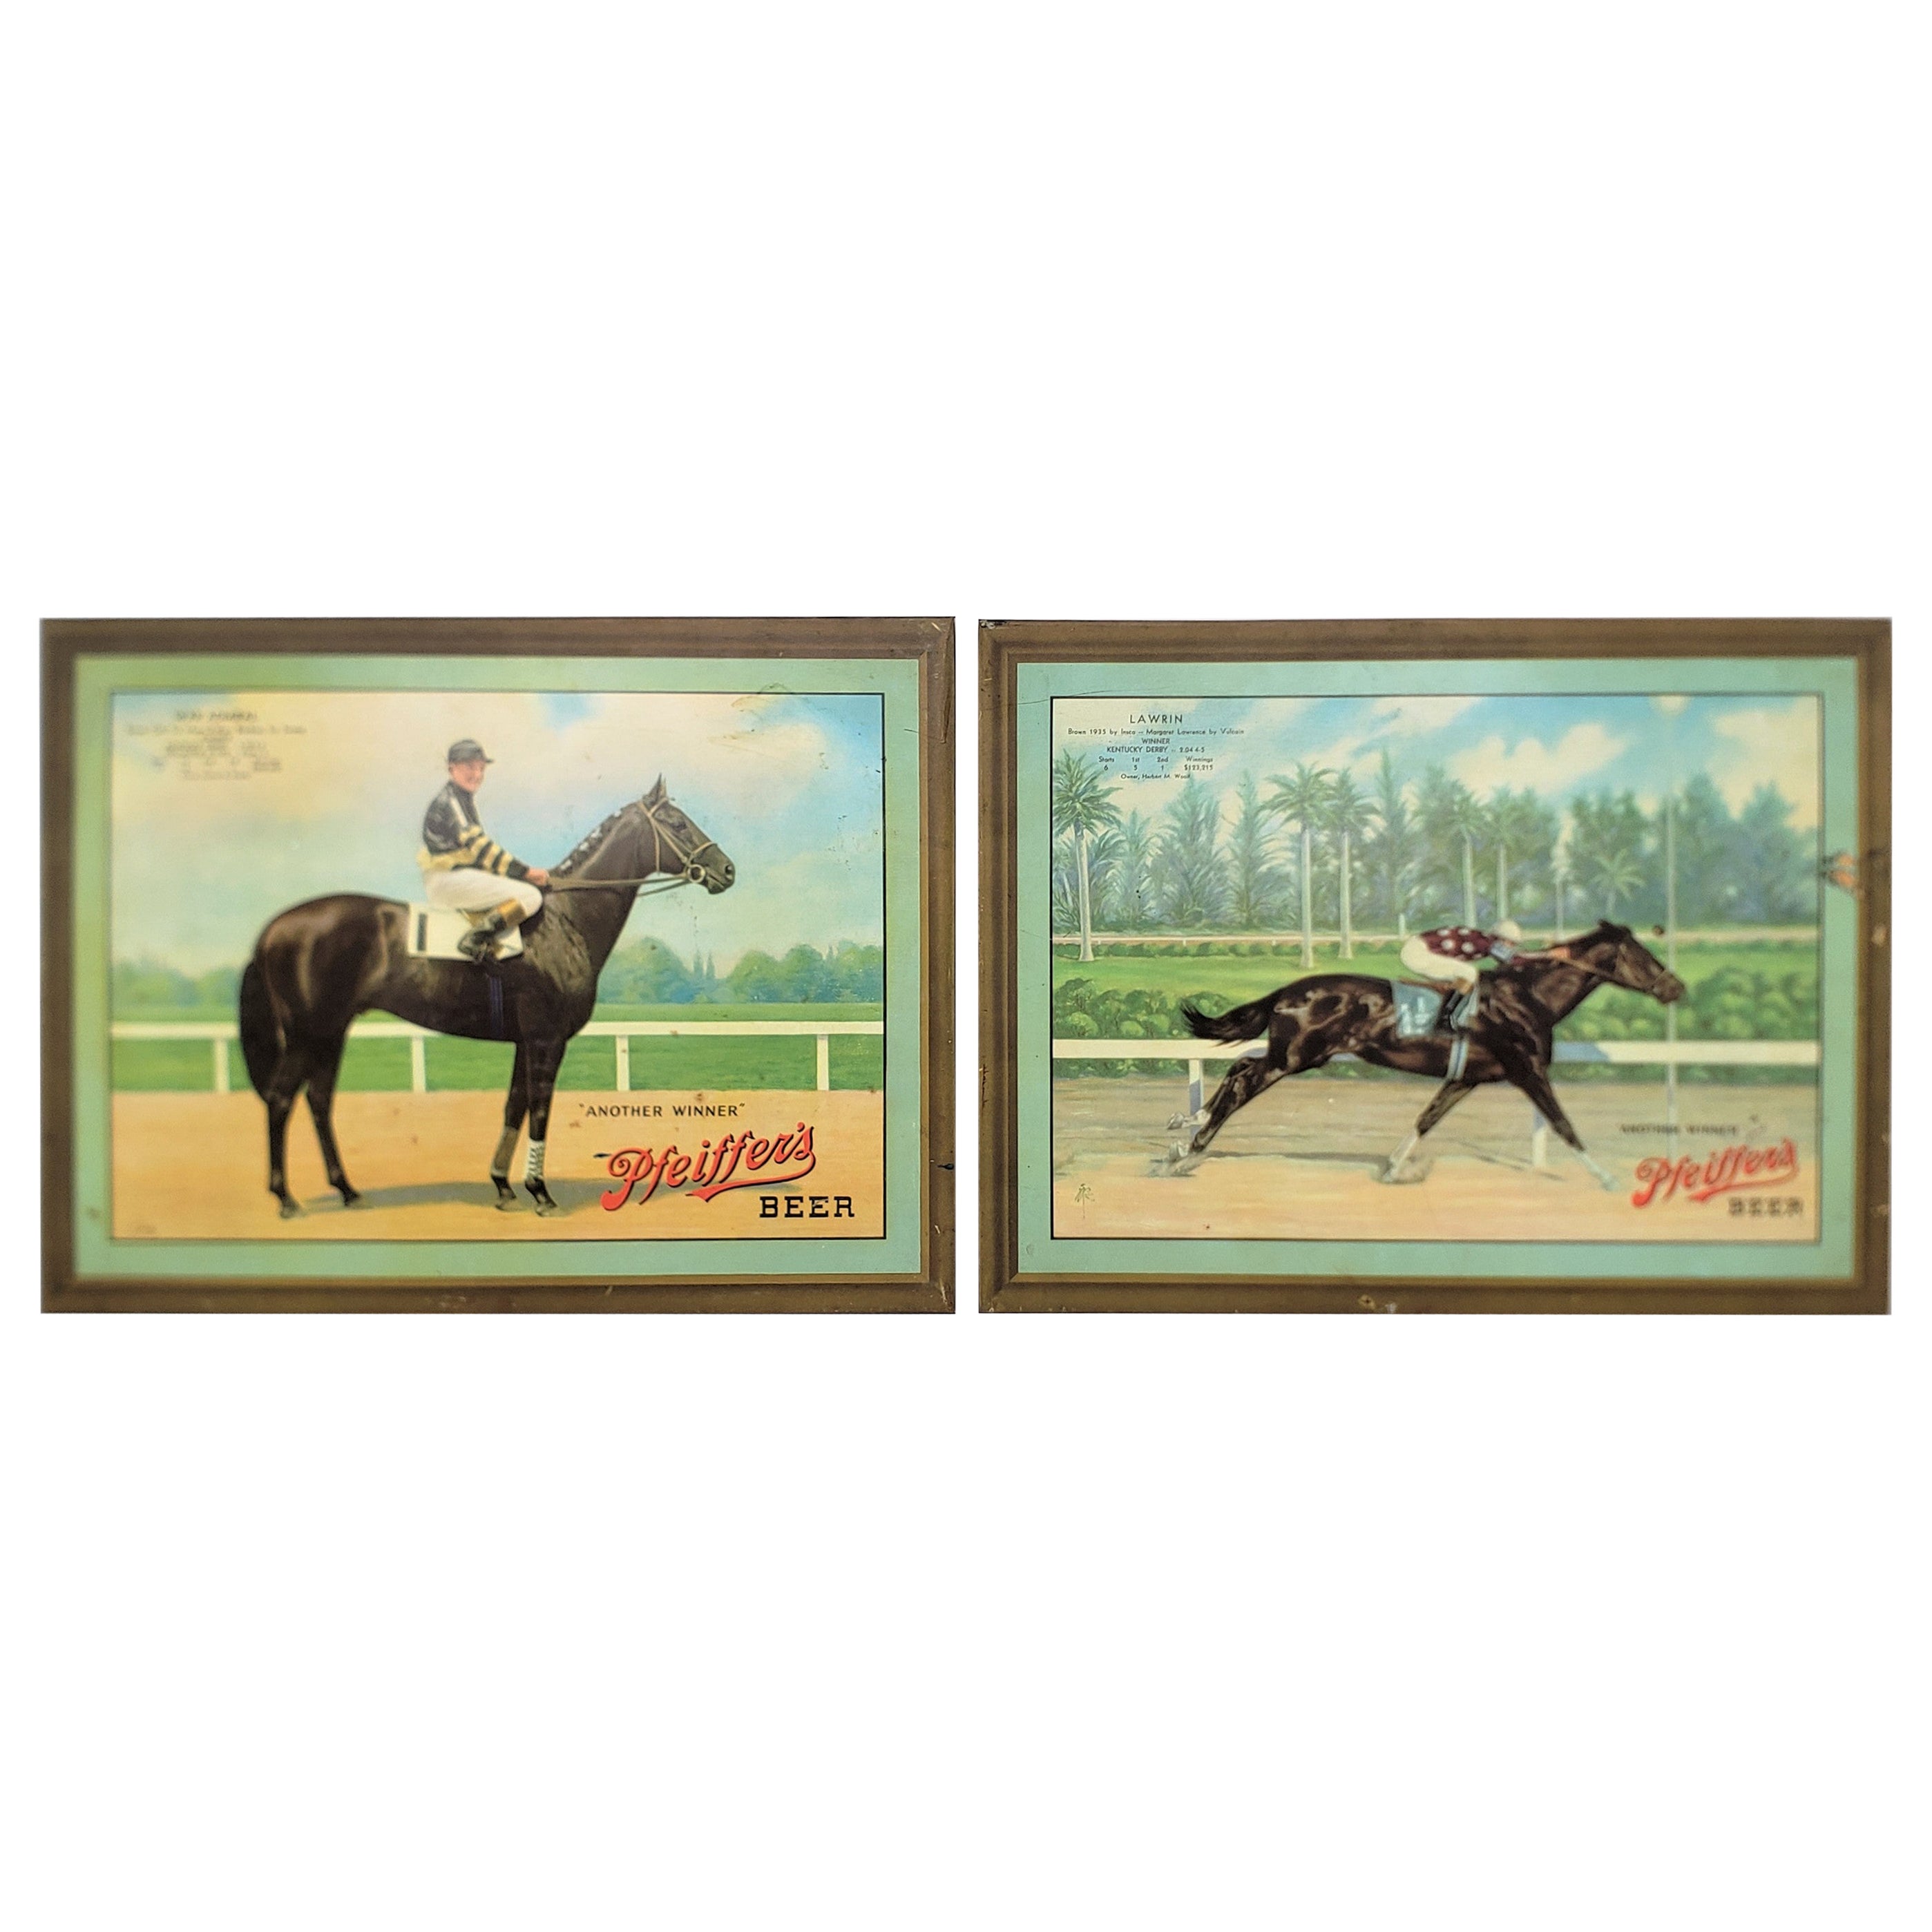 Pair of Pfeiffer's Beer Advertising Wall Hangings with a Horse Racing Theme